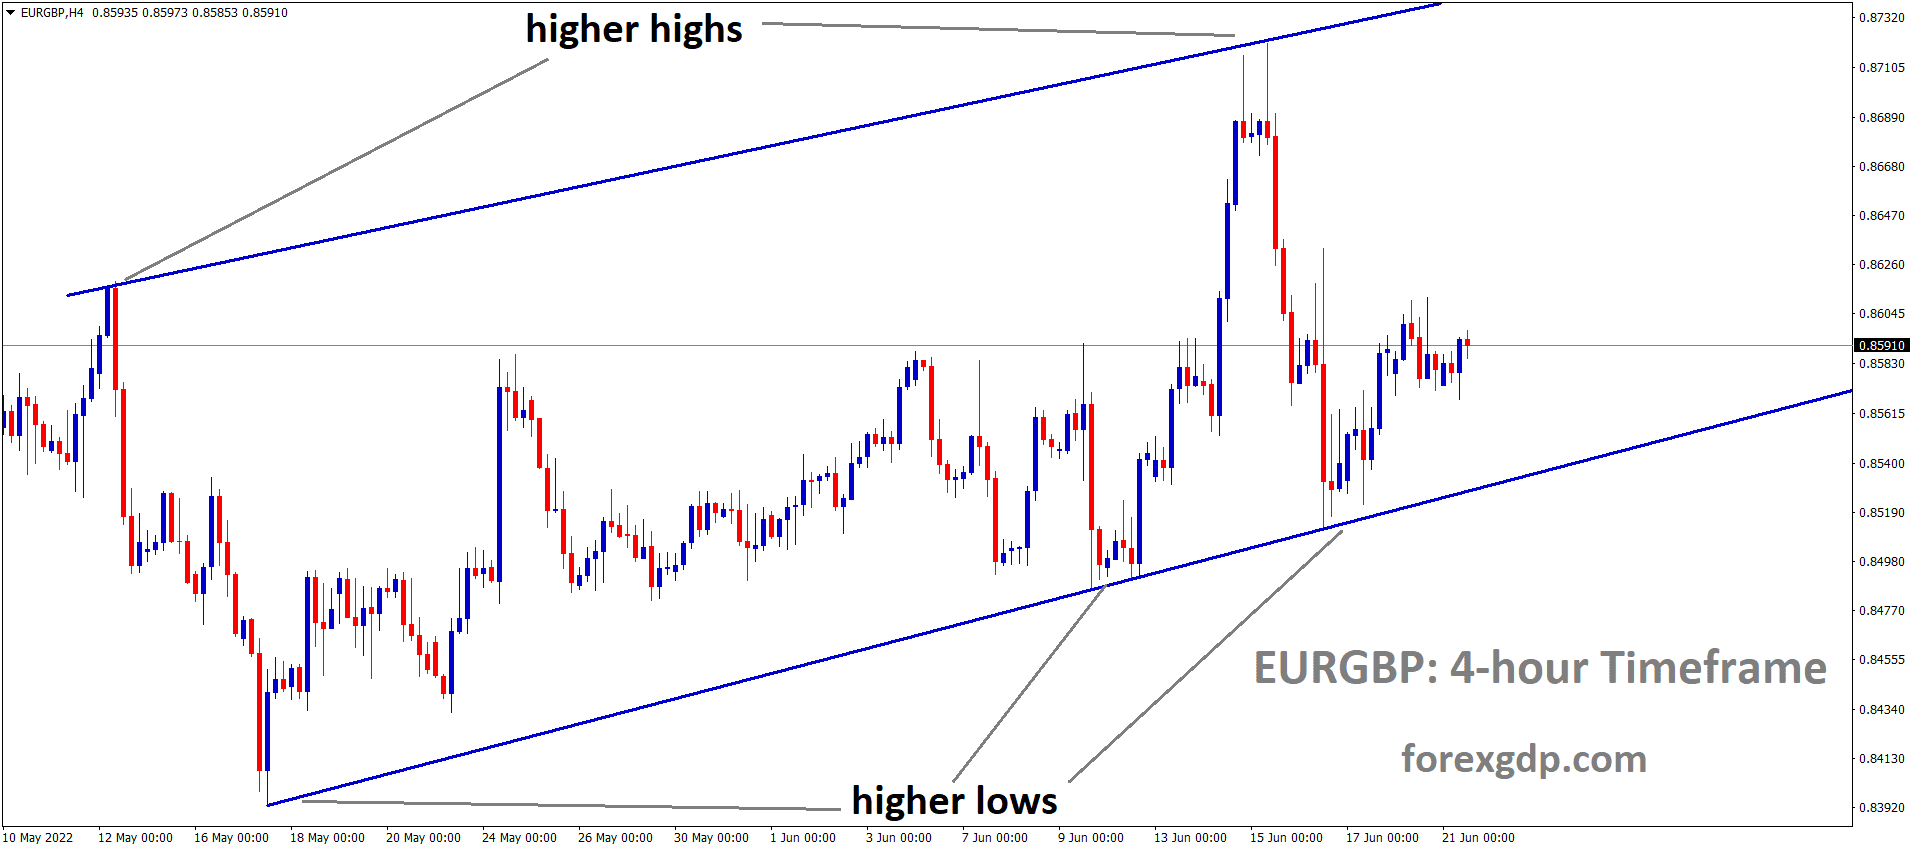 EURGBP is moving in an Ascending channel and the Market has rebounded from the higher low area of the Ascending channel